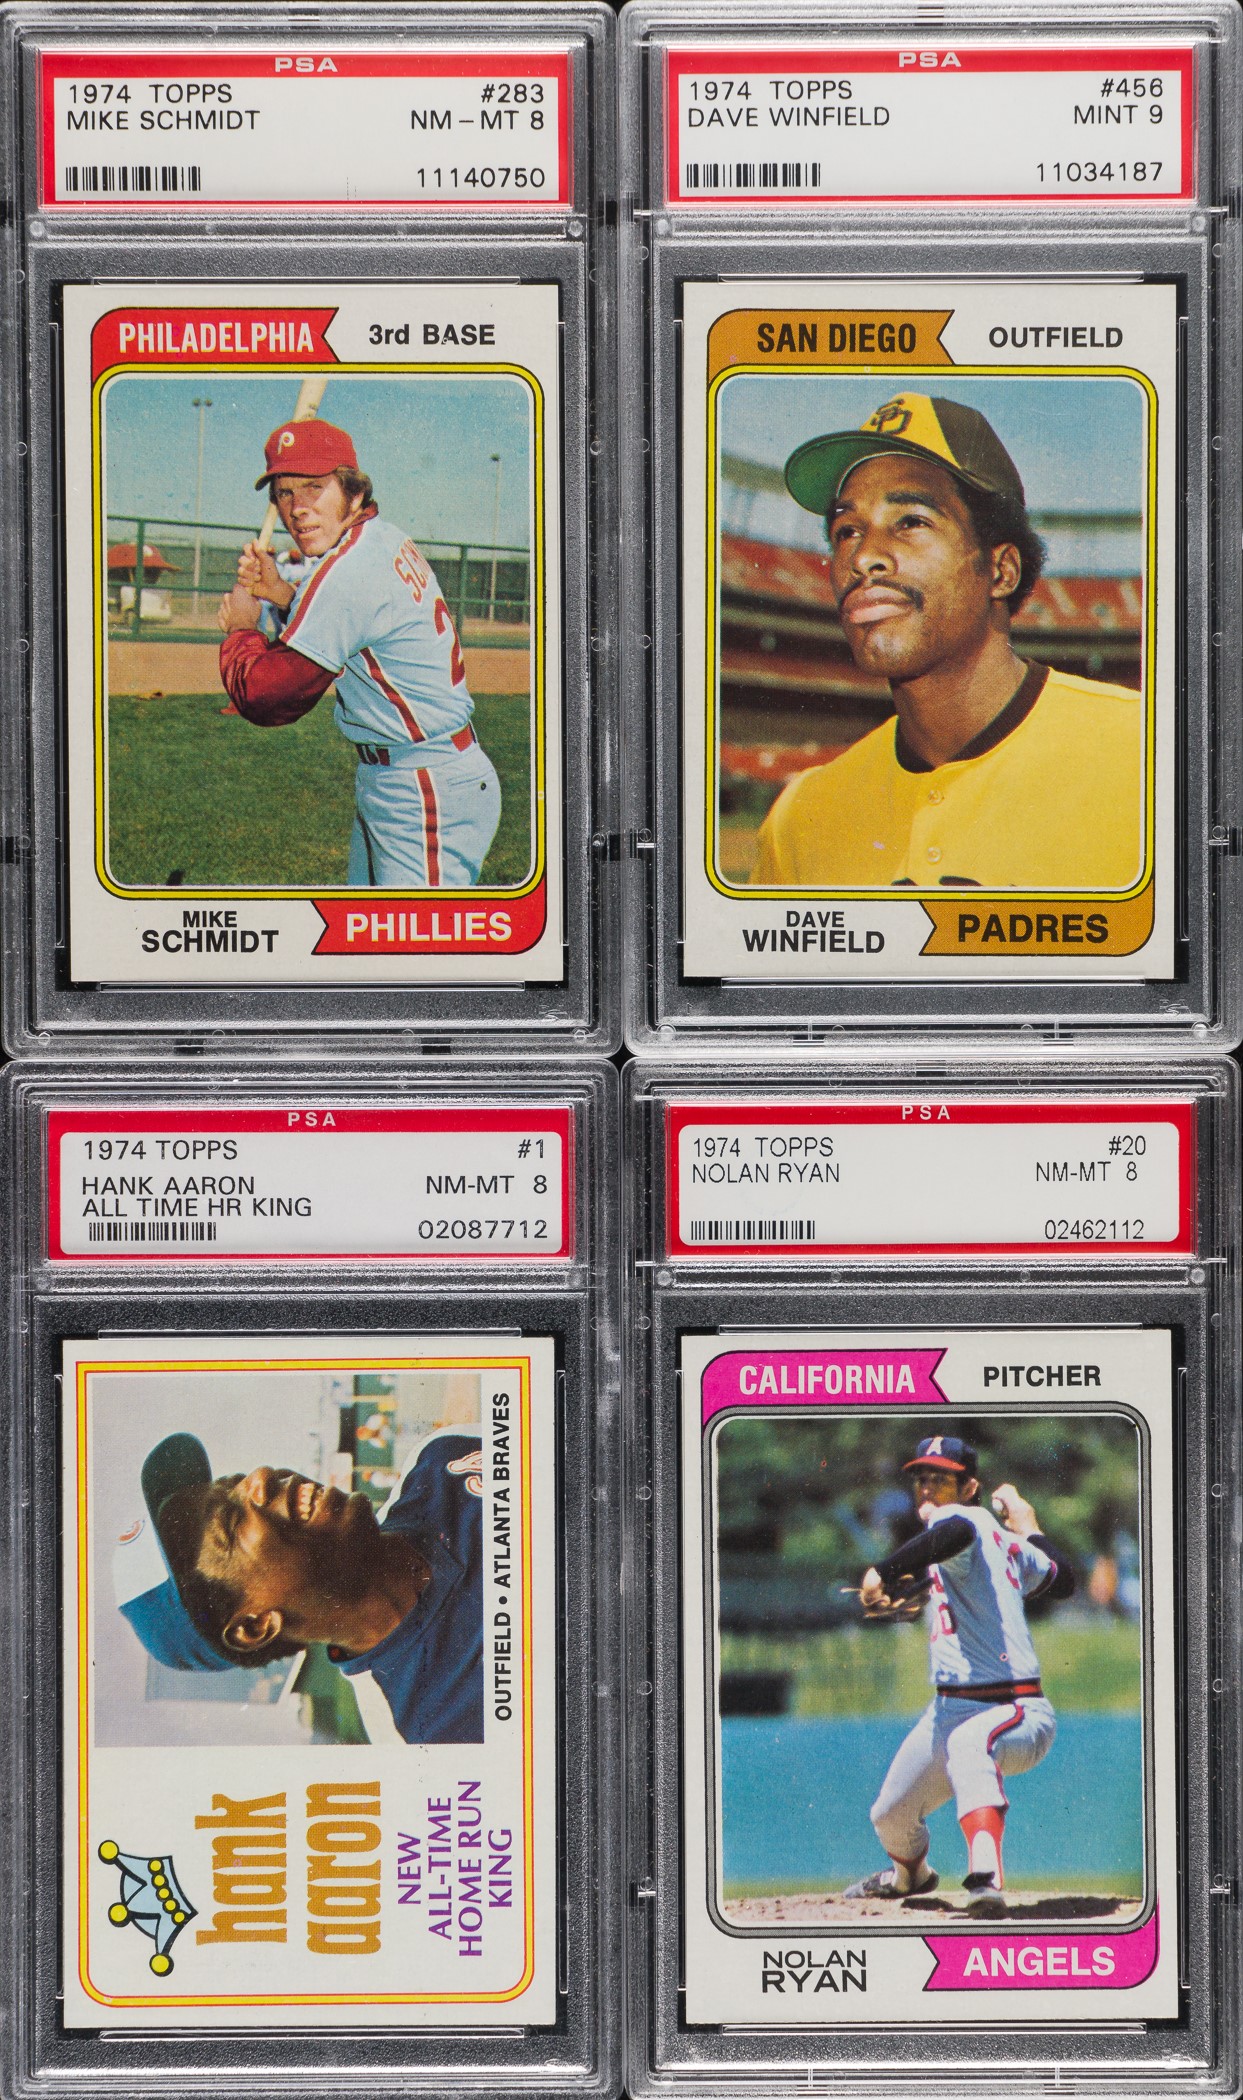 Sold at Auction: 25 Different 1978 Topps Baseball Cards w/ Dave